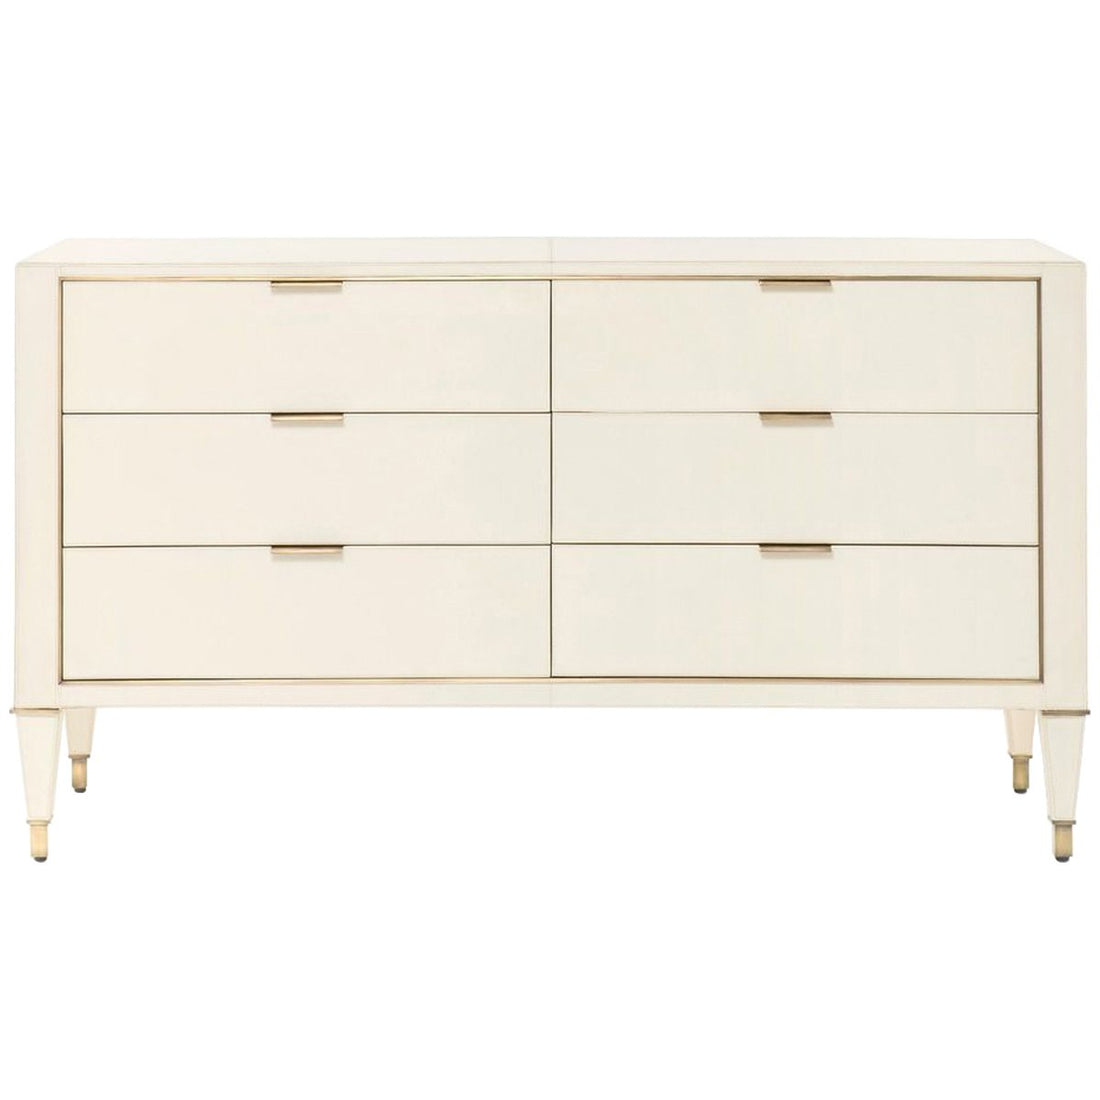 Villa & House Hunter Extra Large 6-Drawer Chest